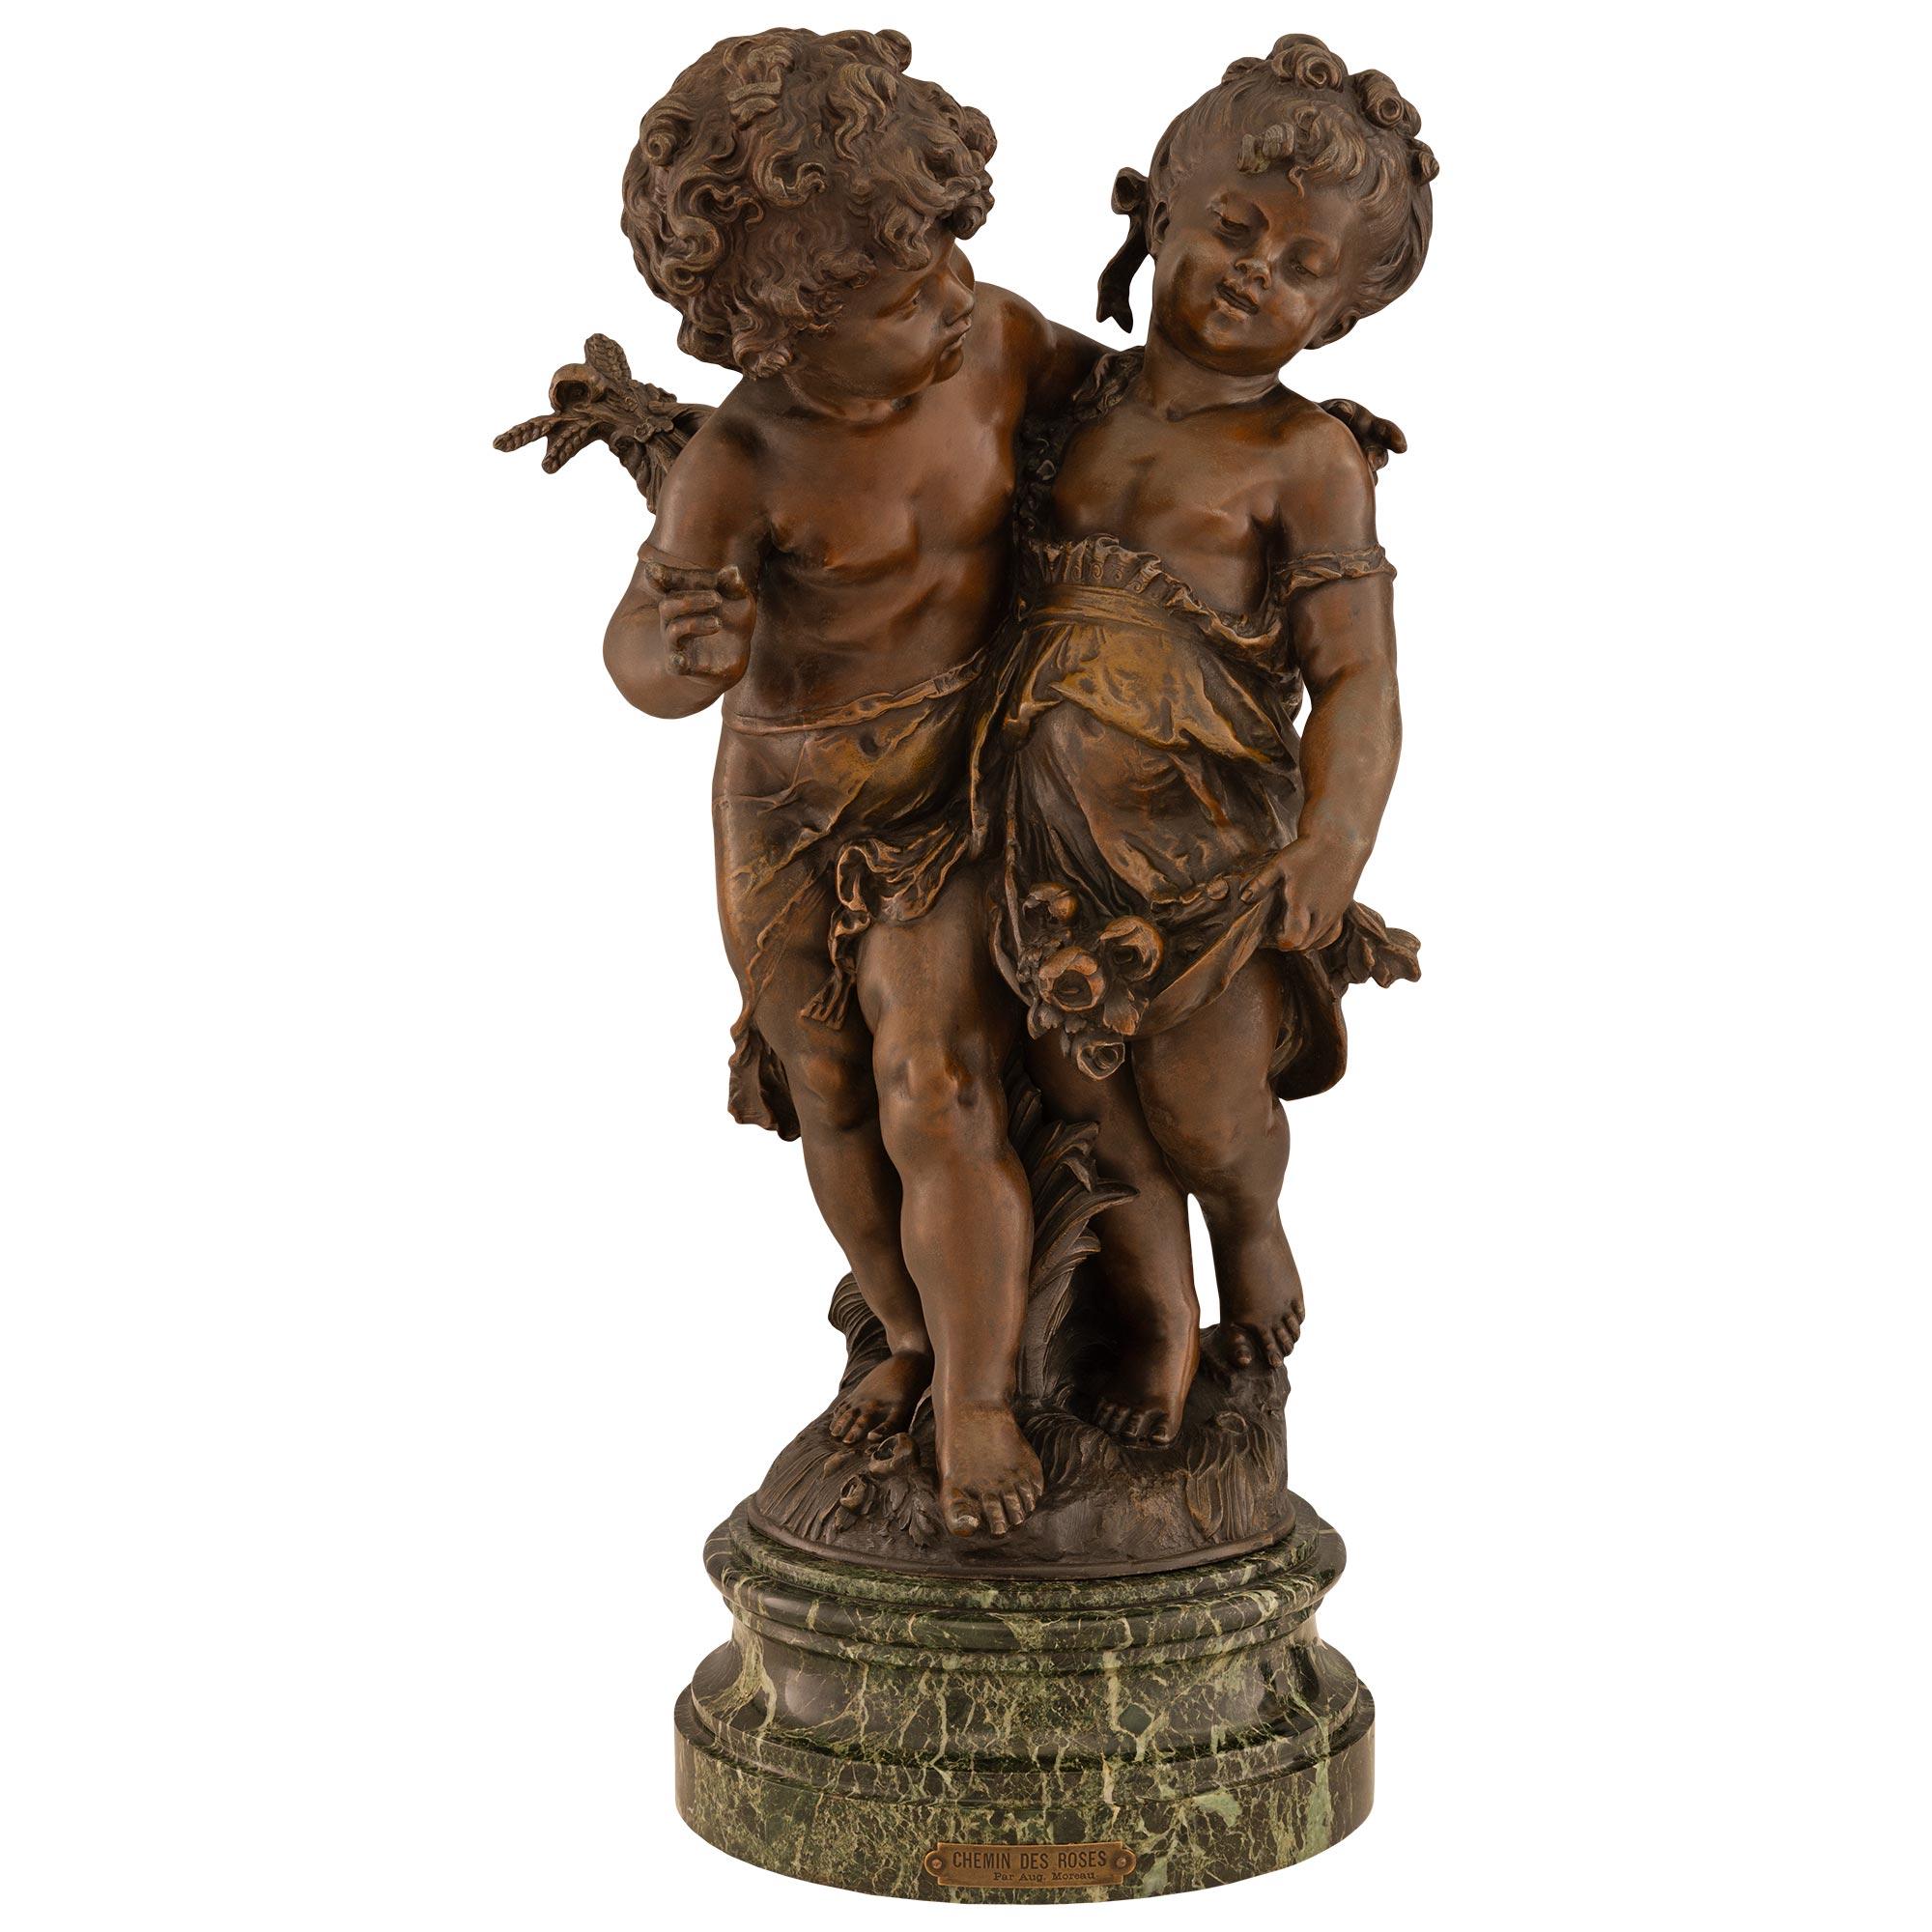 French 19th Century Patinated Bronze Entitled ‘Chemin Des Roses’ by August Morea In Good Condition For Sale In West Palm Beach, FL